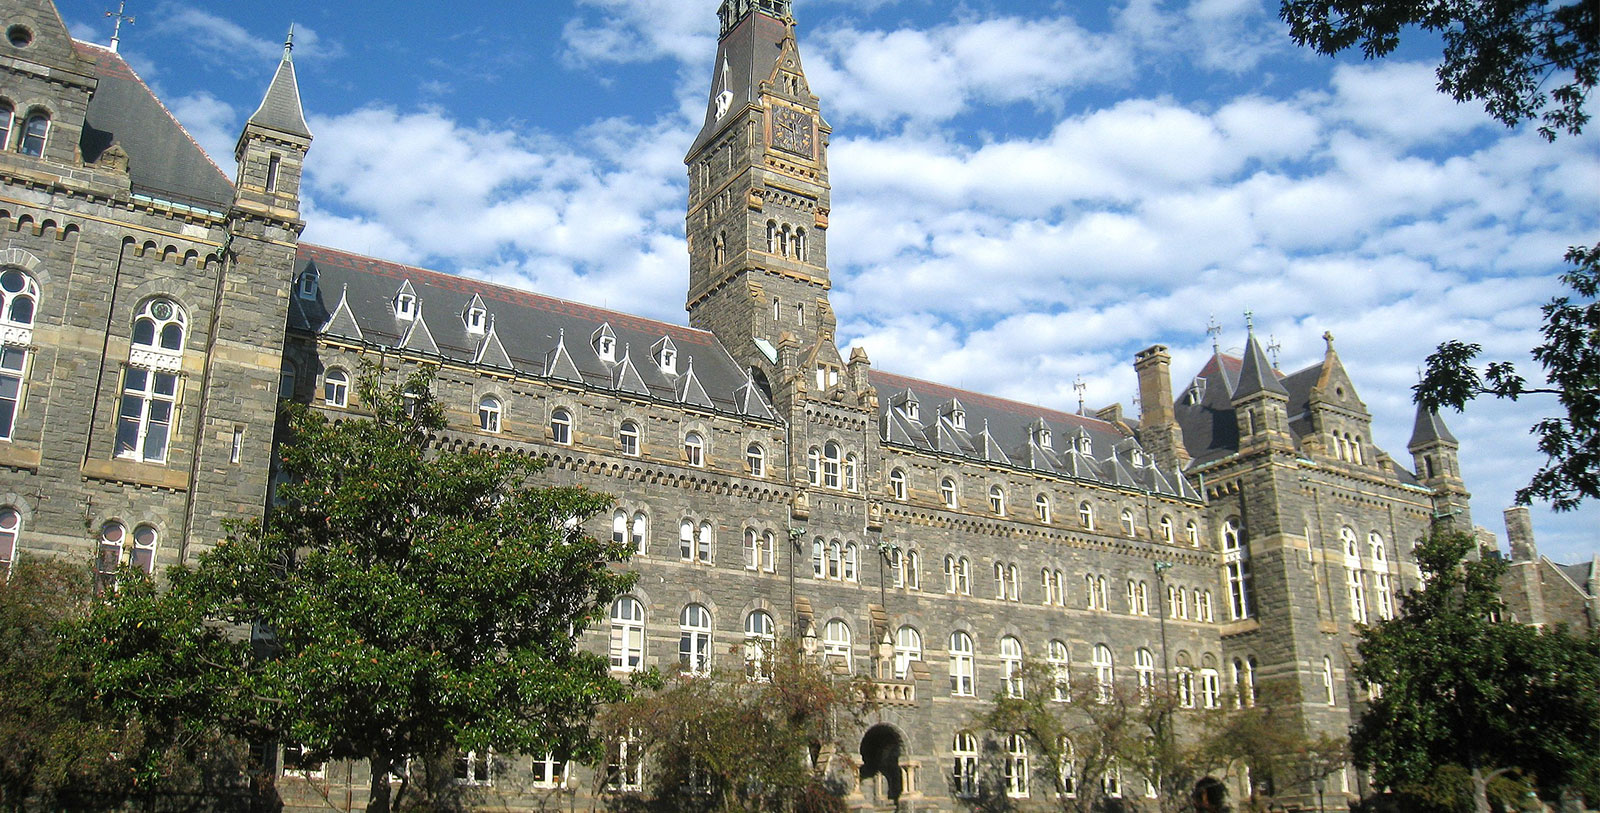 Experience the spectacular medieval Flemish-Romanesque style architecture at nearby Georgetown University.